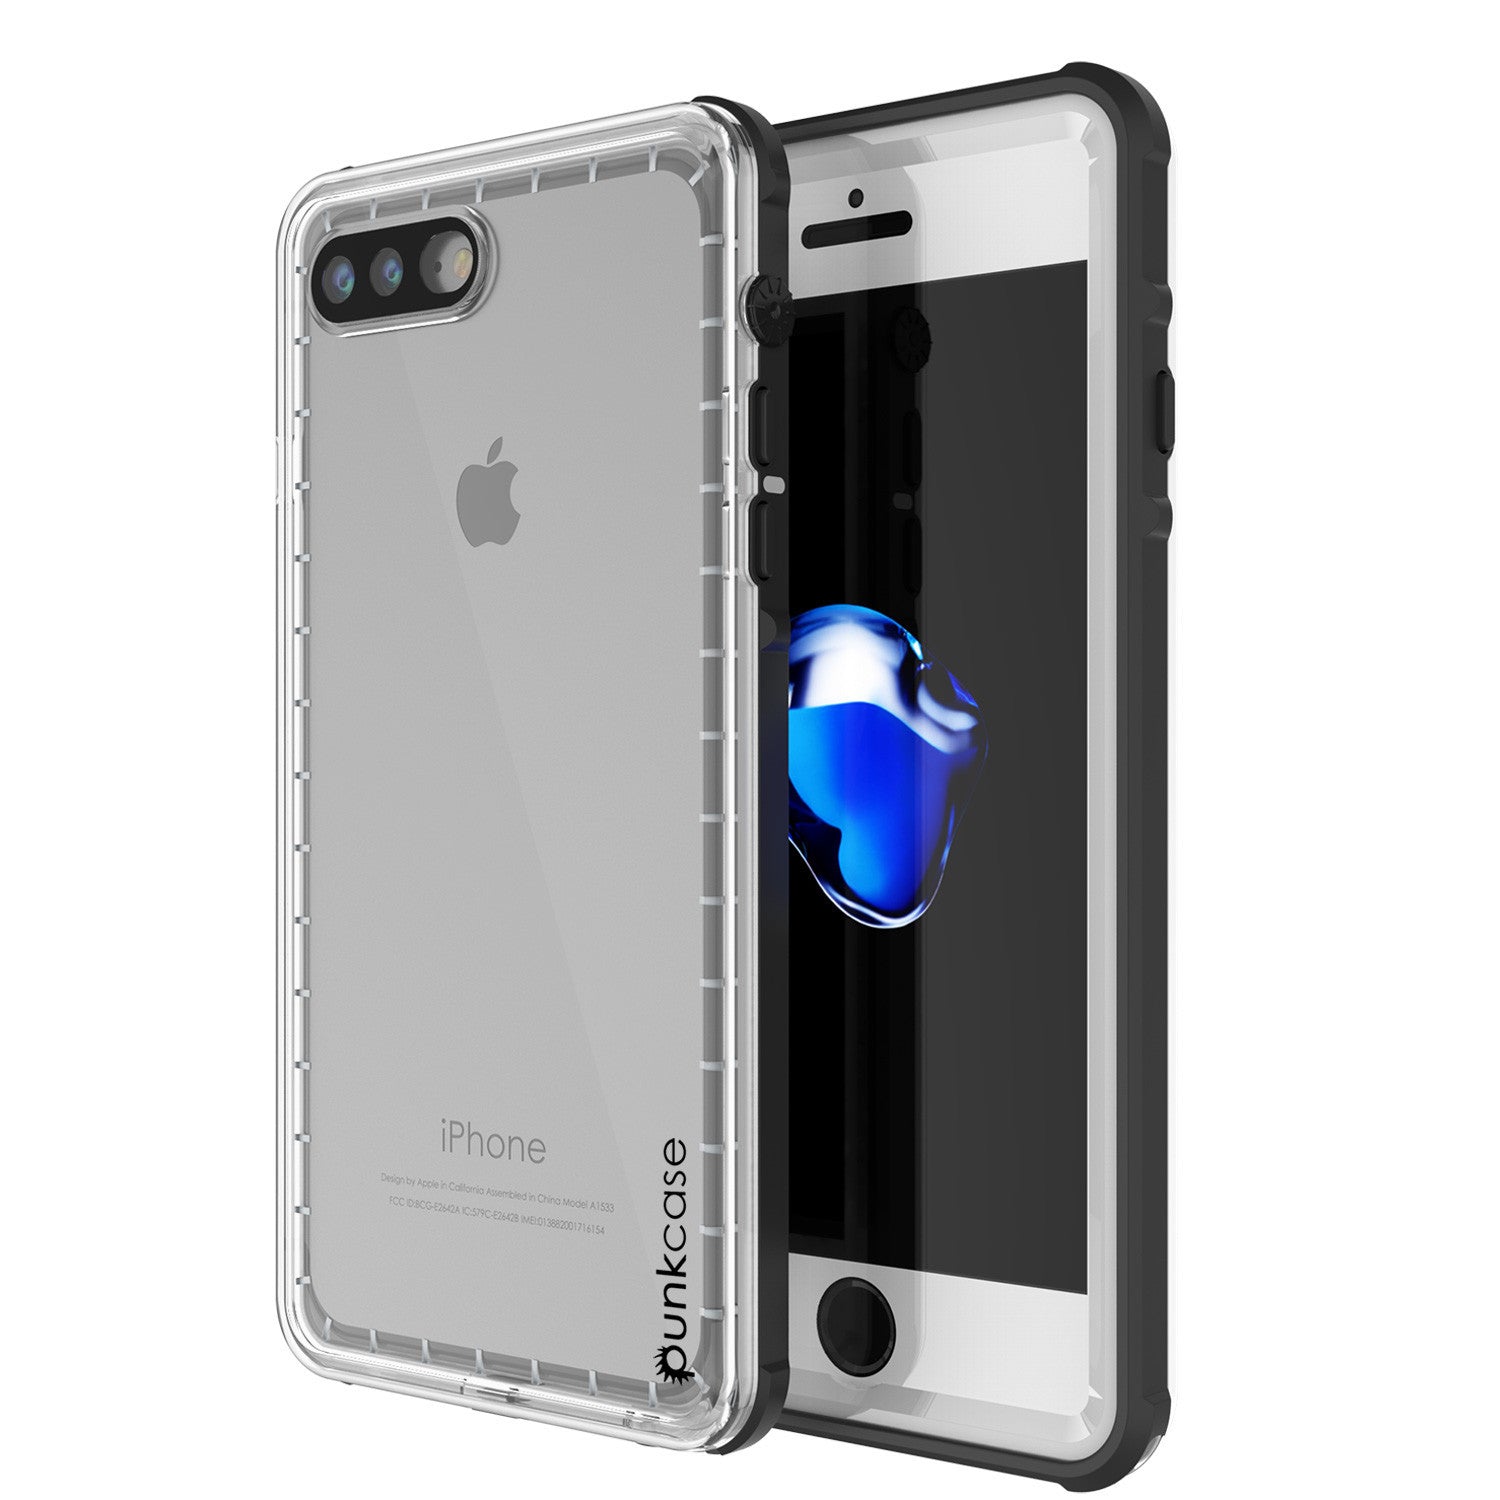 iPhone 7+ Plus Waterproof Case, PUNKcase CRYSTAL White W/ Attached Screen Protector | Warranty